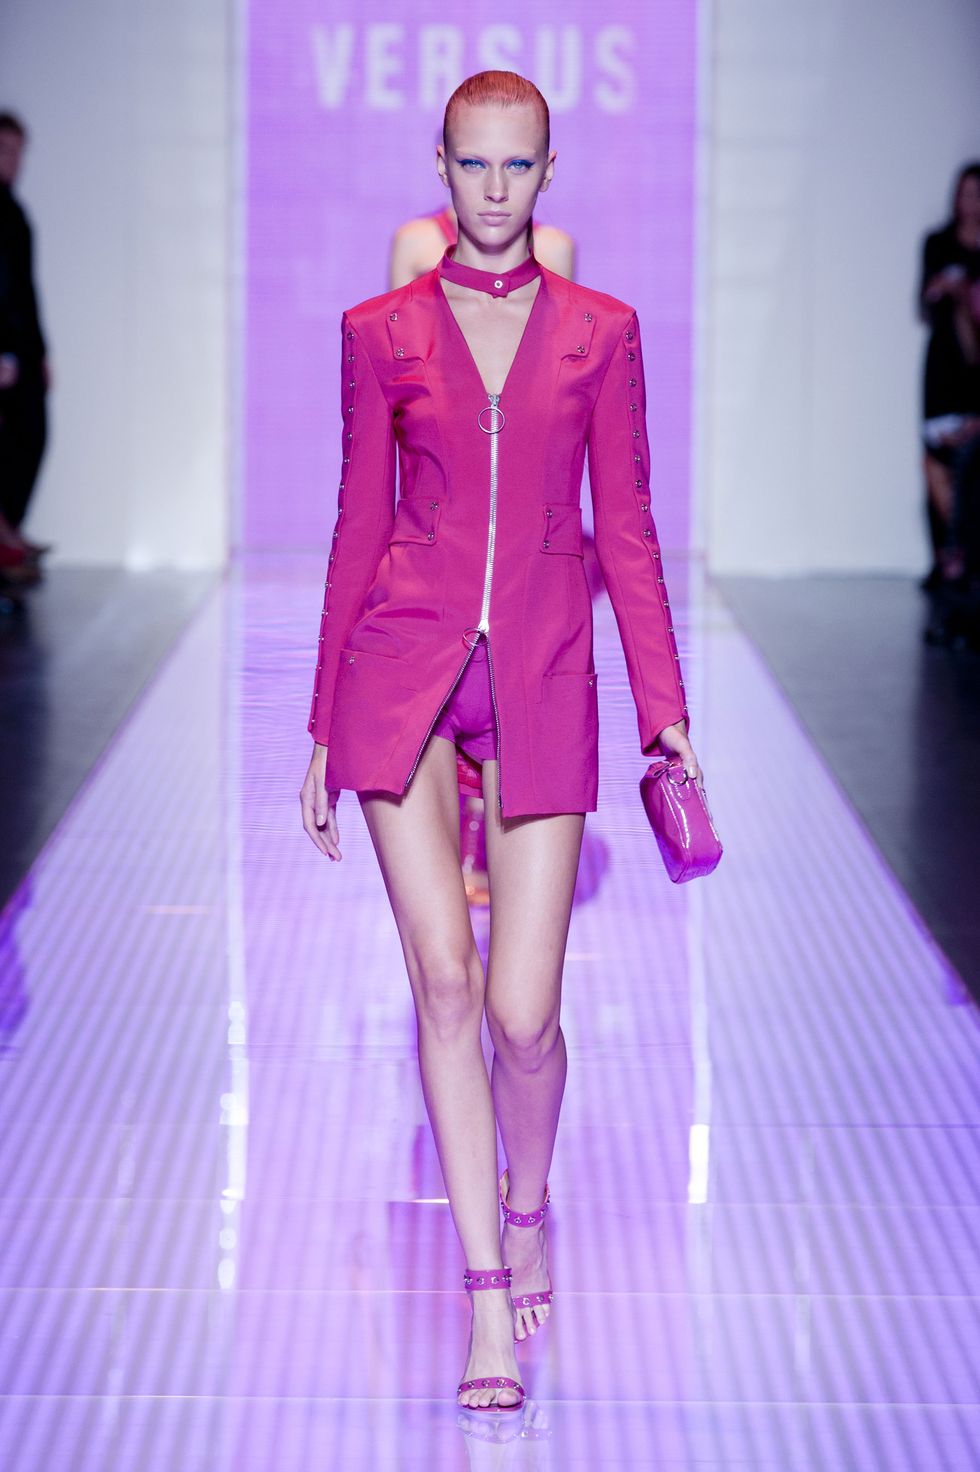 Fashion show, Event, Human body, Shoulder, Runway, Joint, Outerwear, Fashion model, Magenta, Pink, 